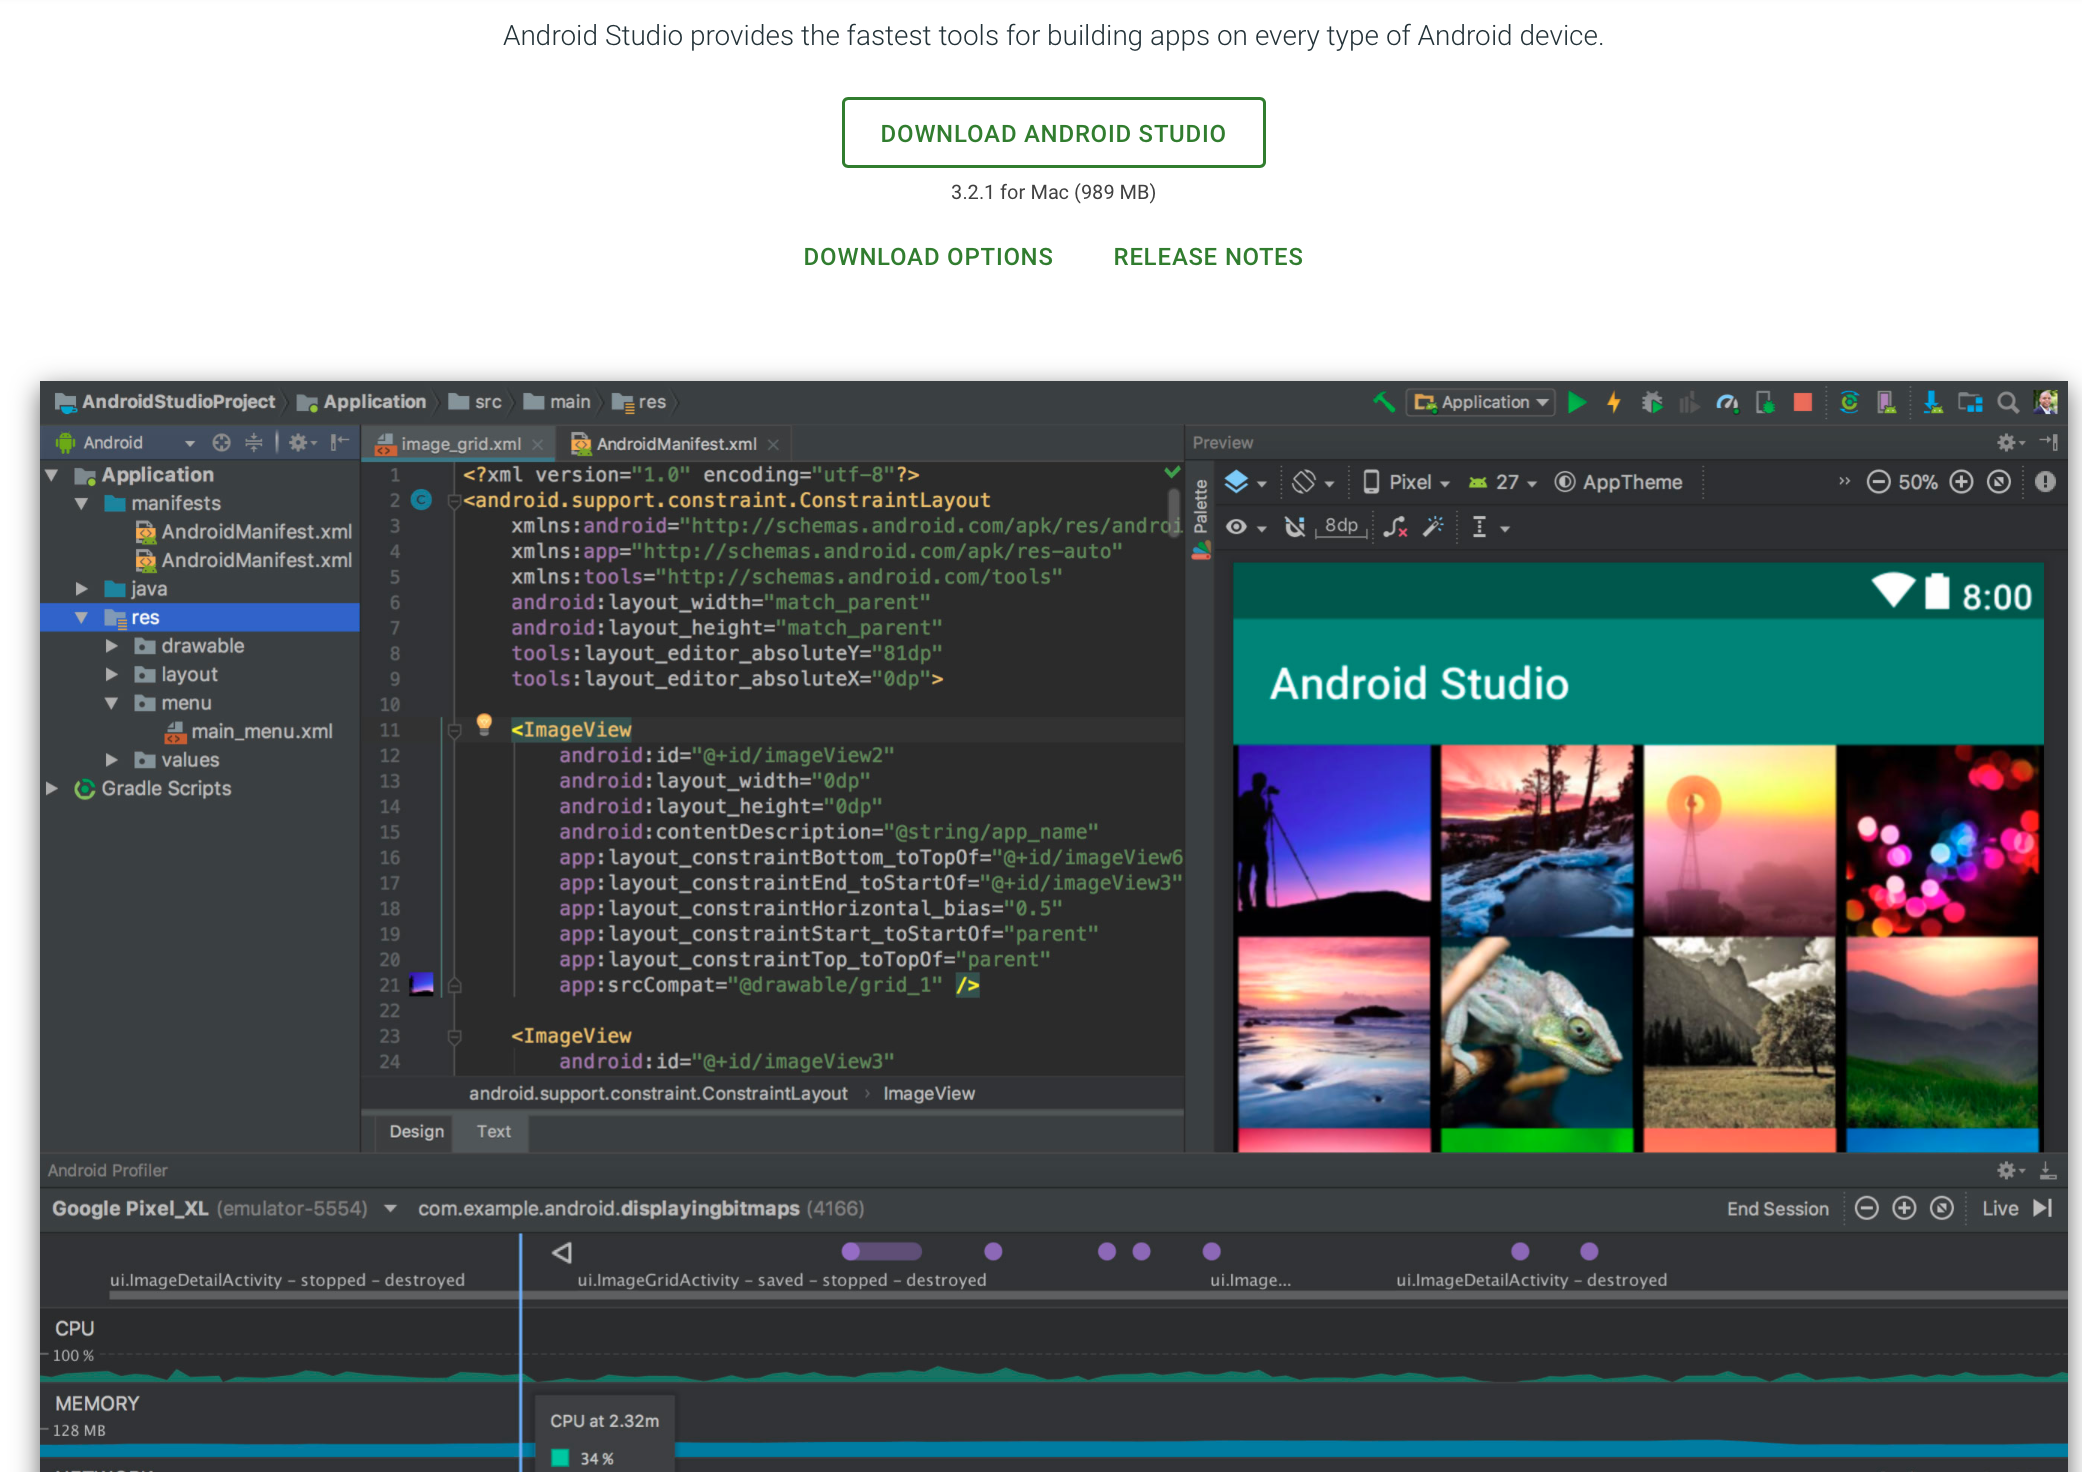 Android studio 2.2.3 for mac